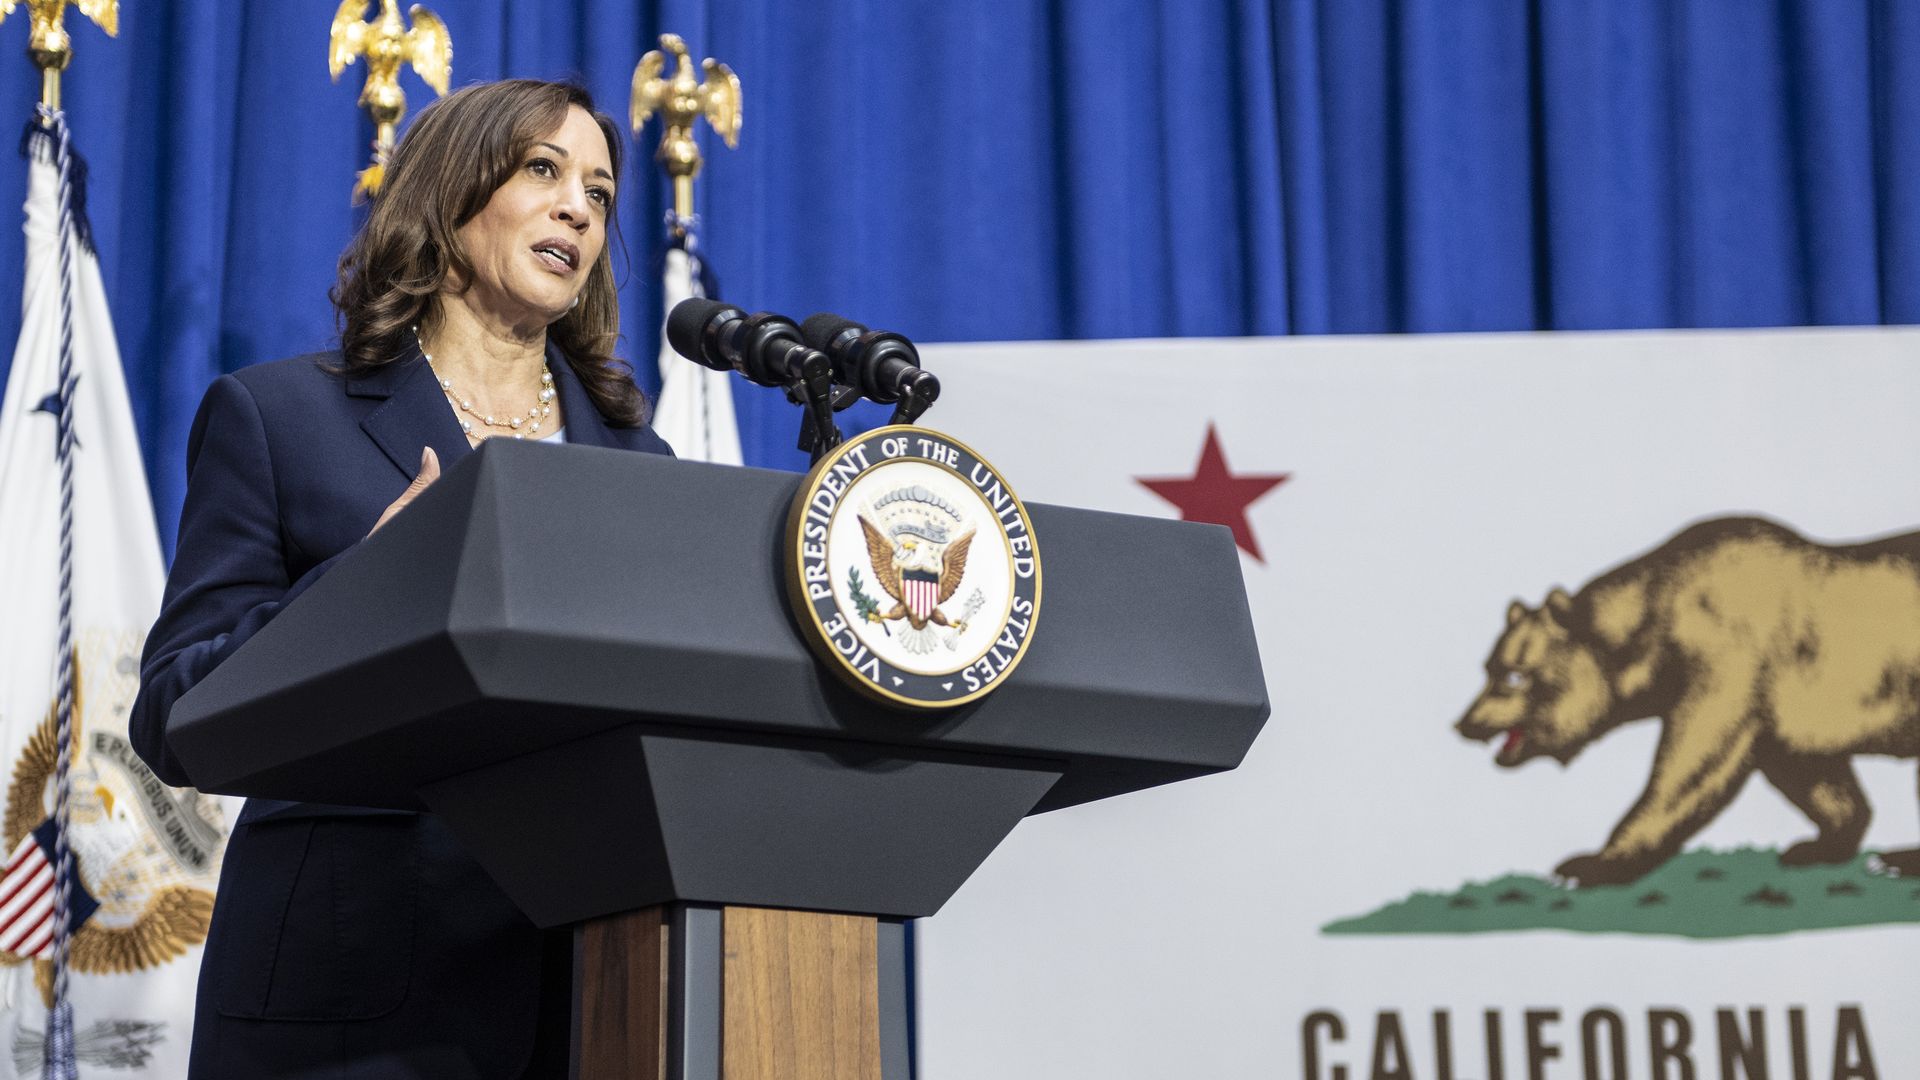 Photo of Kamala Harris speaking at a podium on a stage, with the California state flag in the backdrop